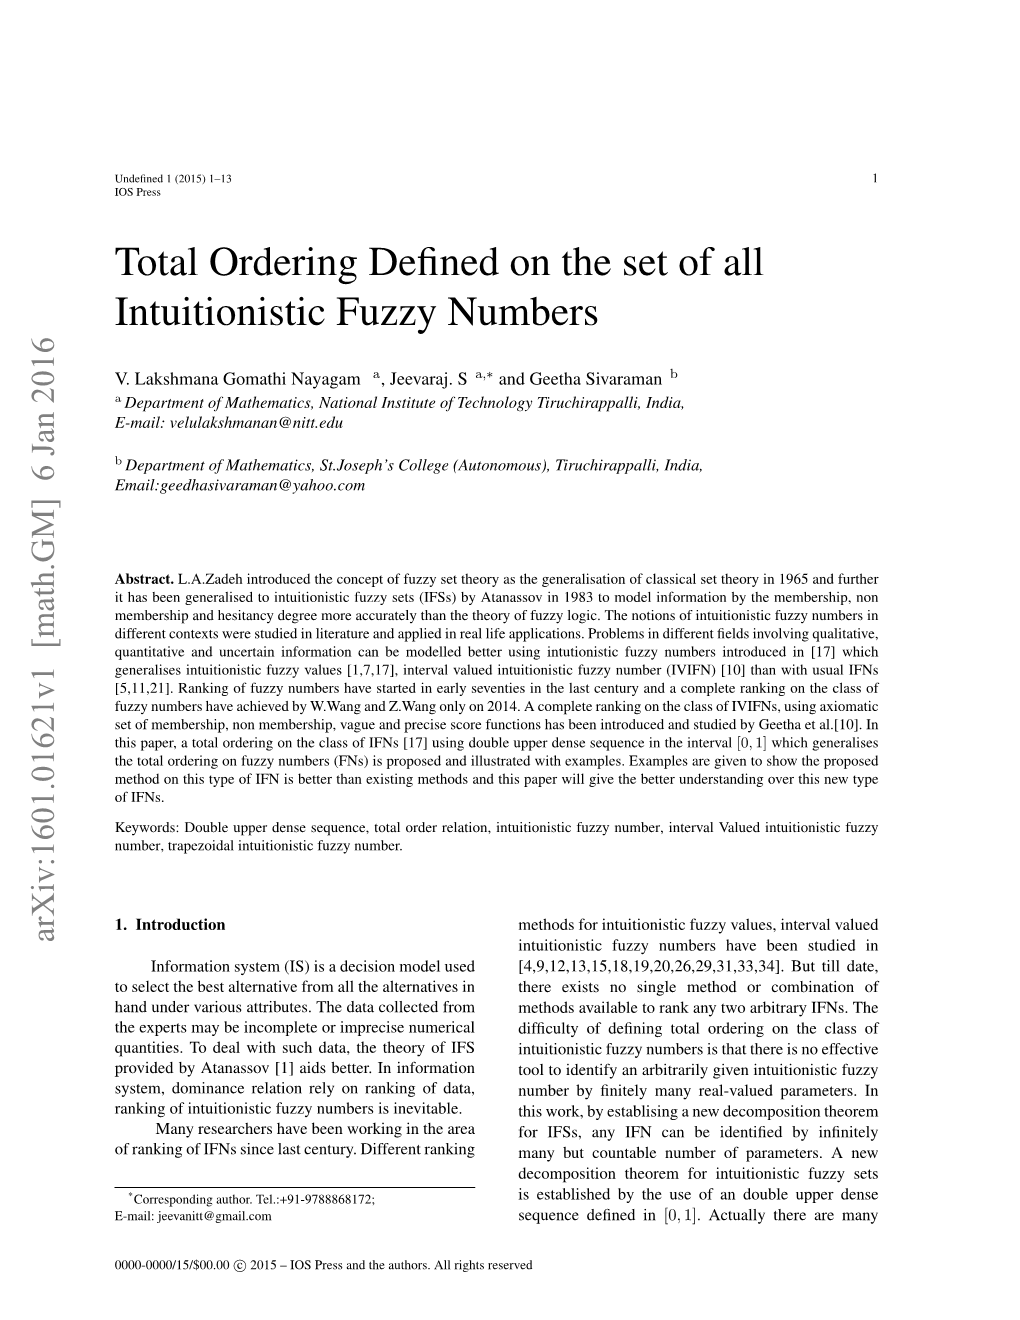 Total Ordering Defined on the Set of All Intuitionistic Fuzzy Numbers